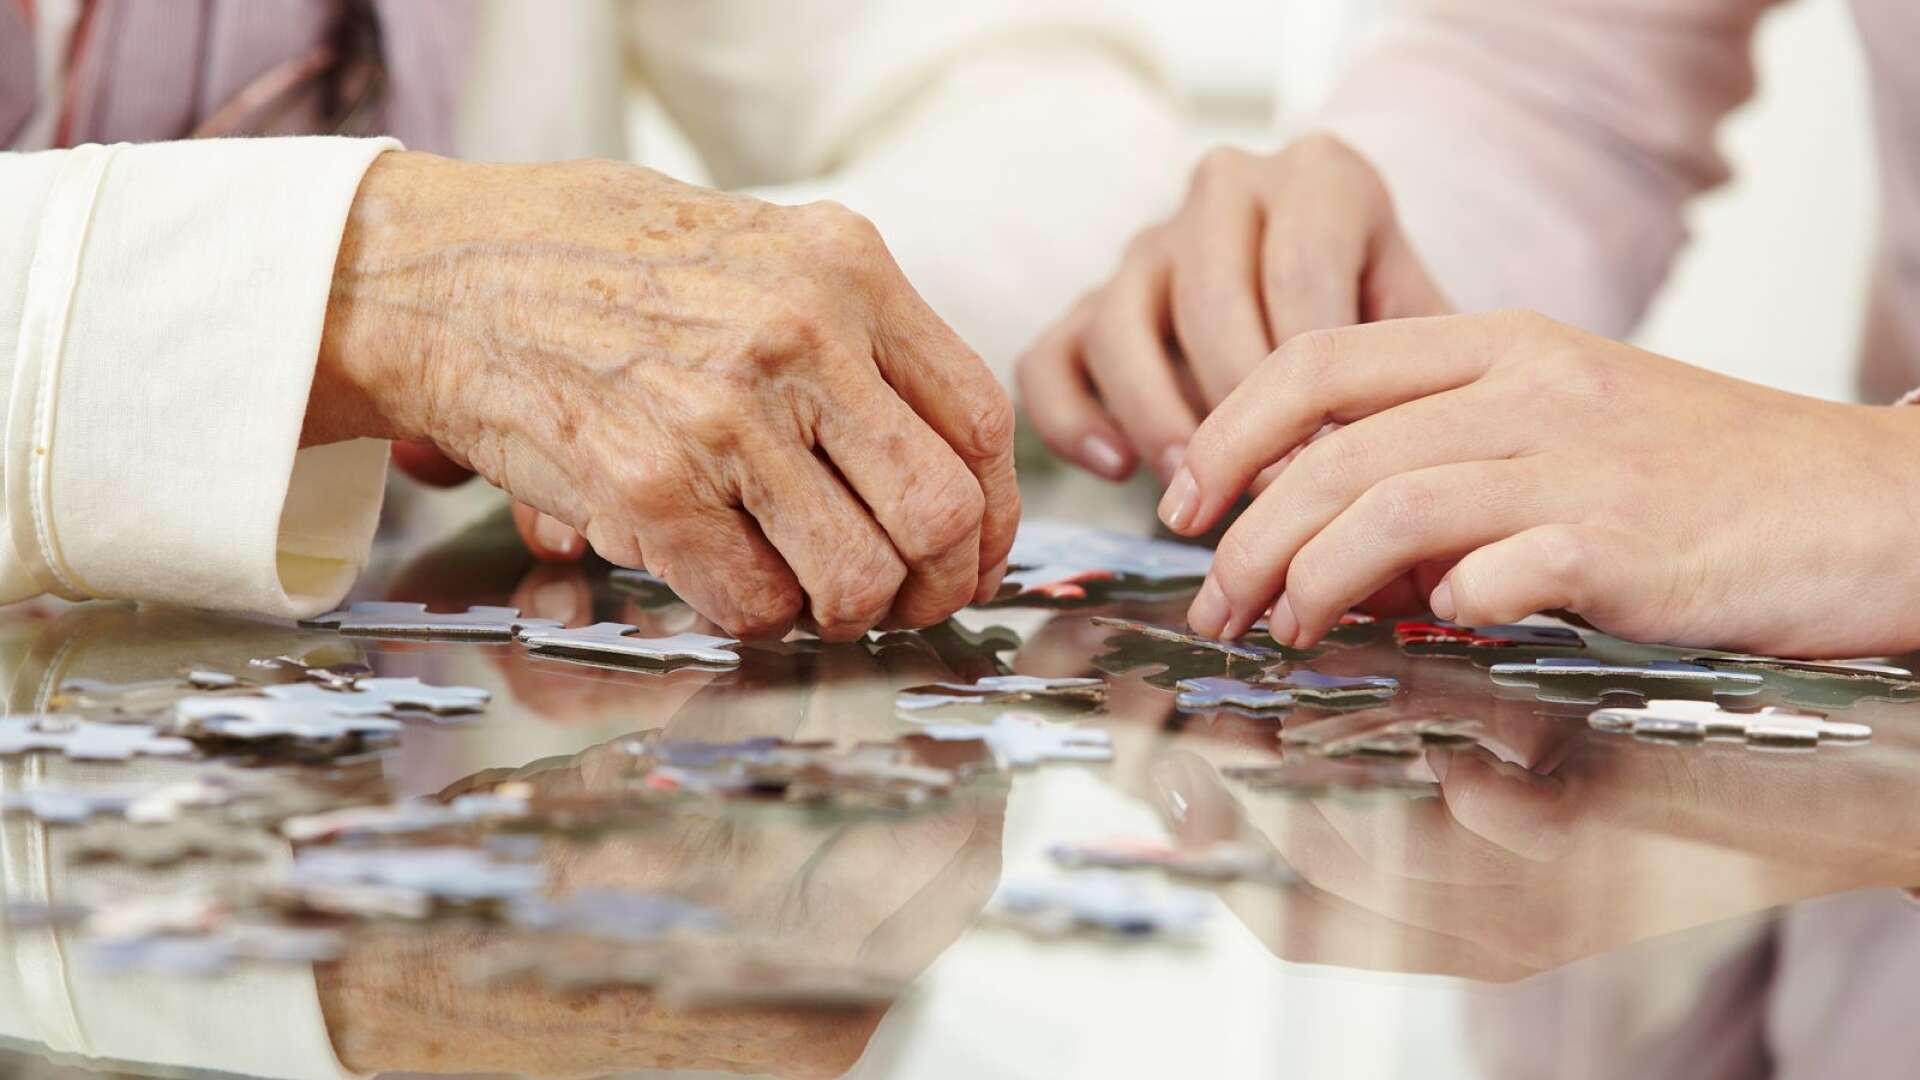 Old hands solving jigsaw puzzle in a nursing home